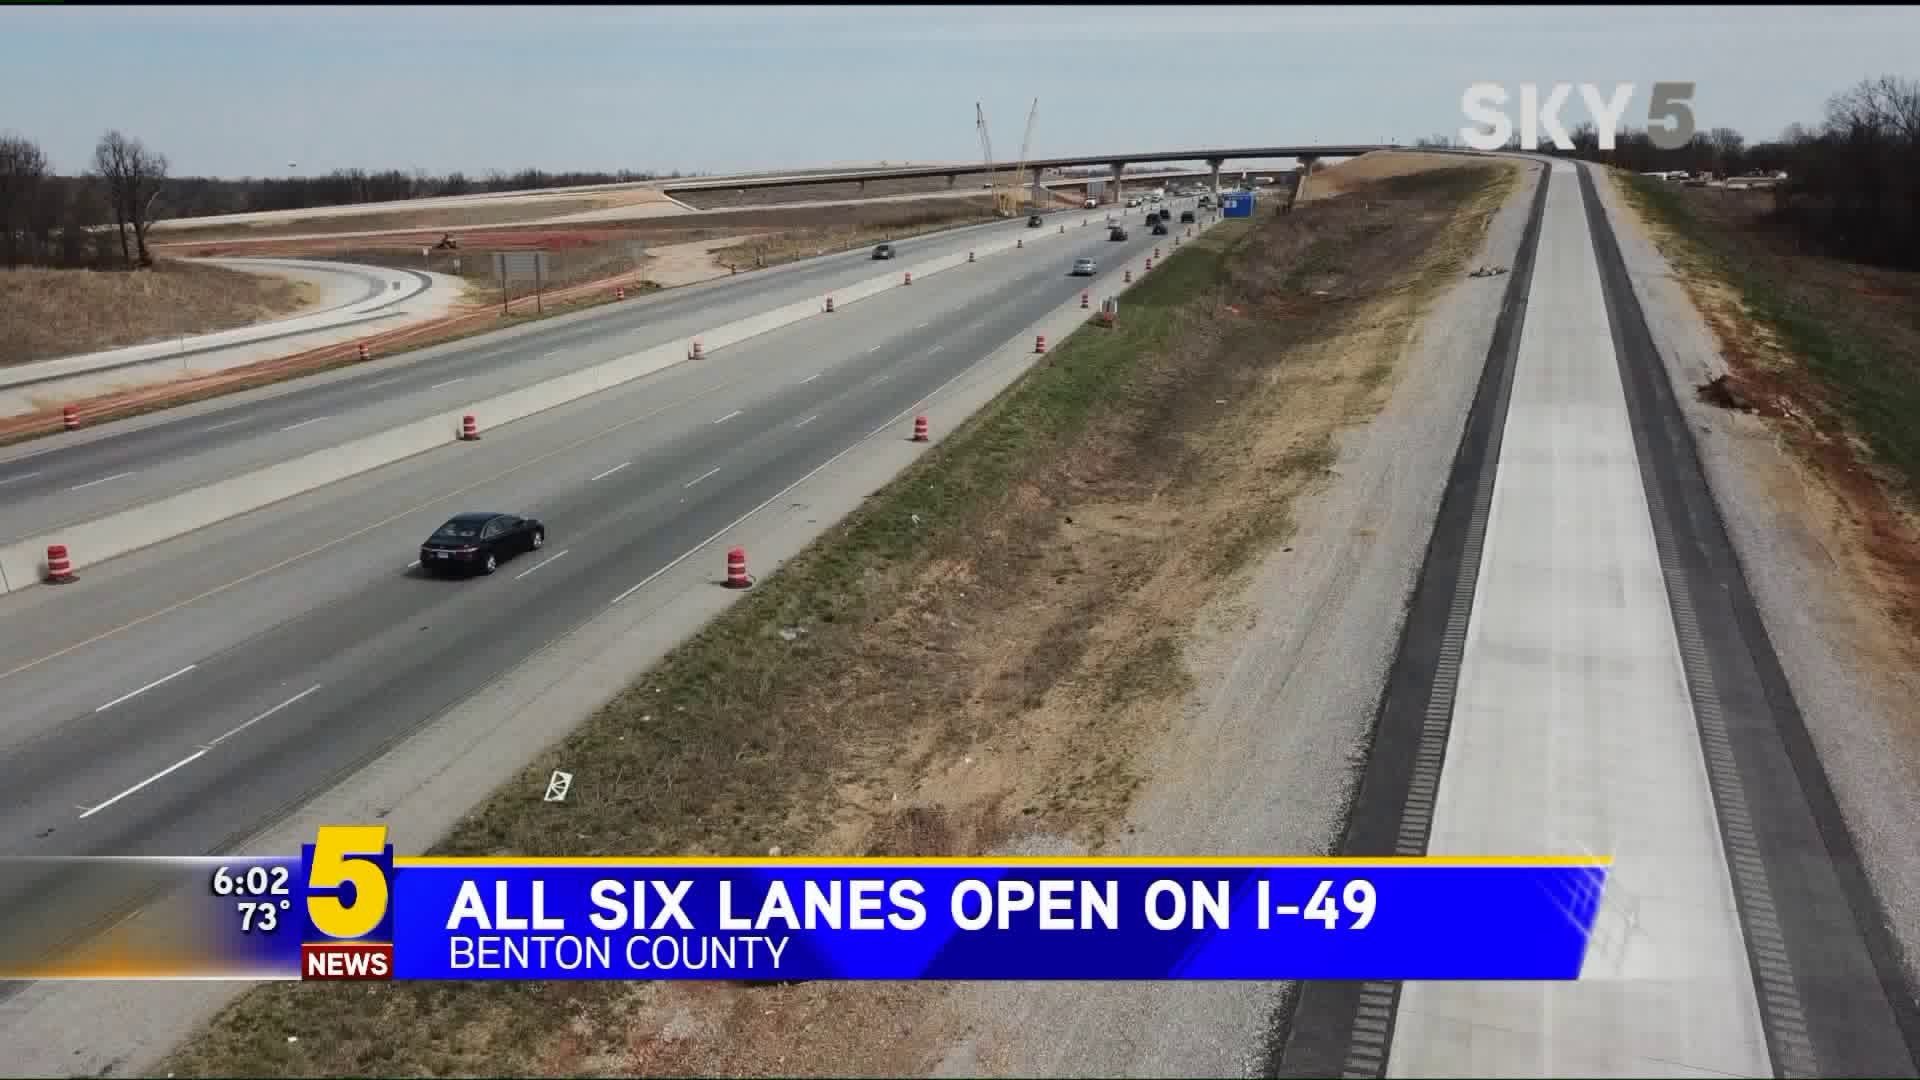 All Six Lanes Open On I-49